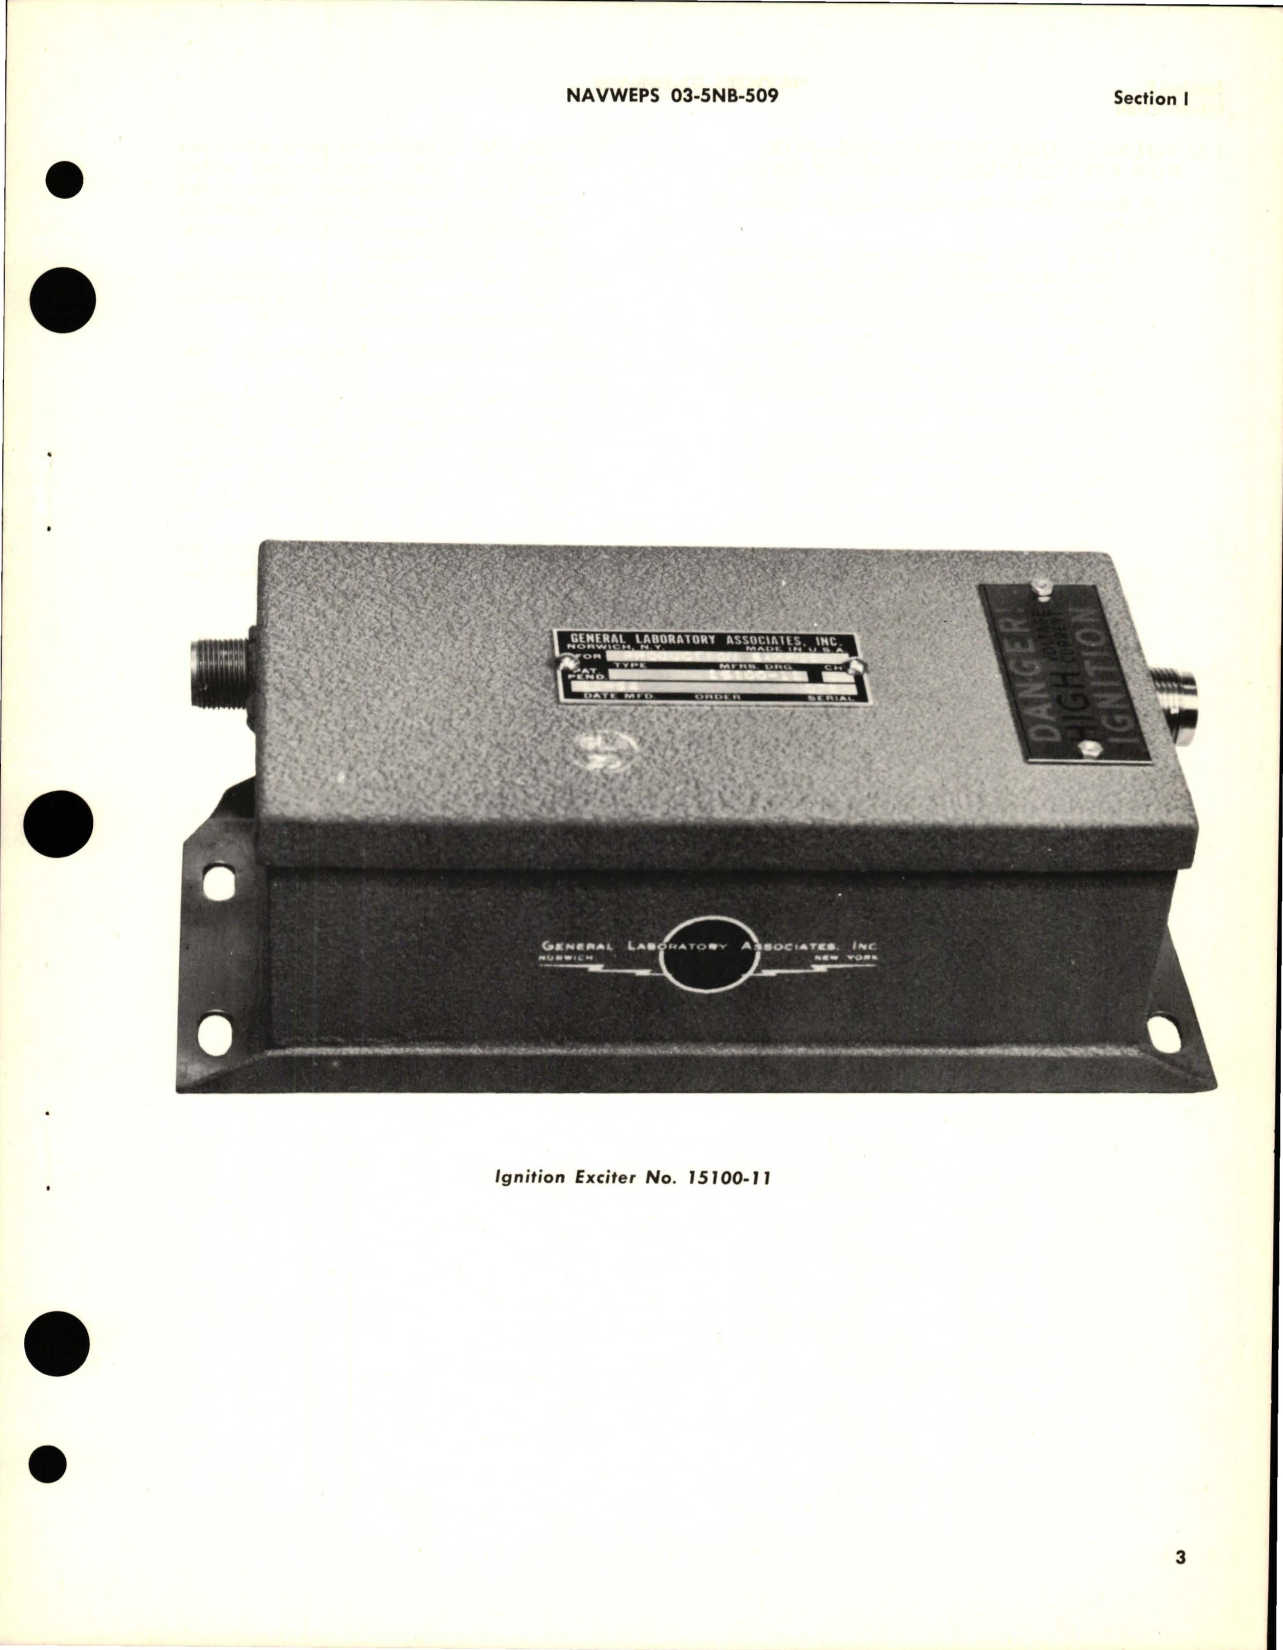 Sample page 5 from AirCorps Library document: Illustrated Parts Breakdown for Capacitor Discharge Electronic Ignition Exciter - No 15100-11